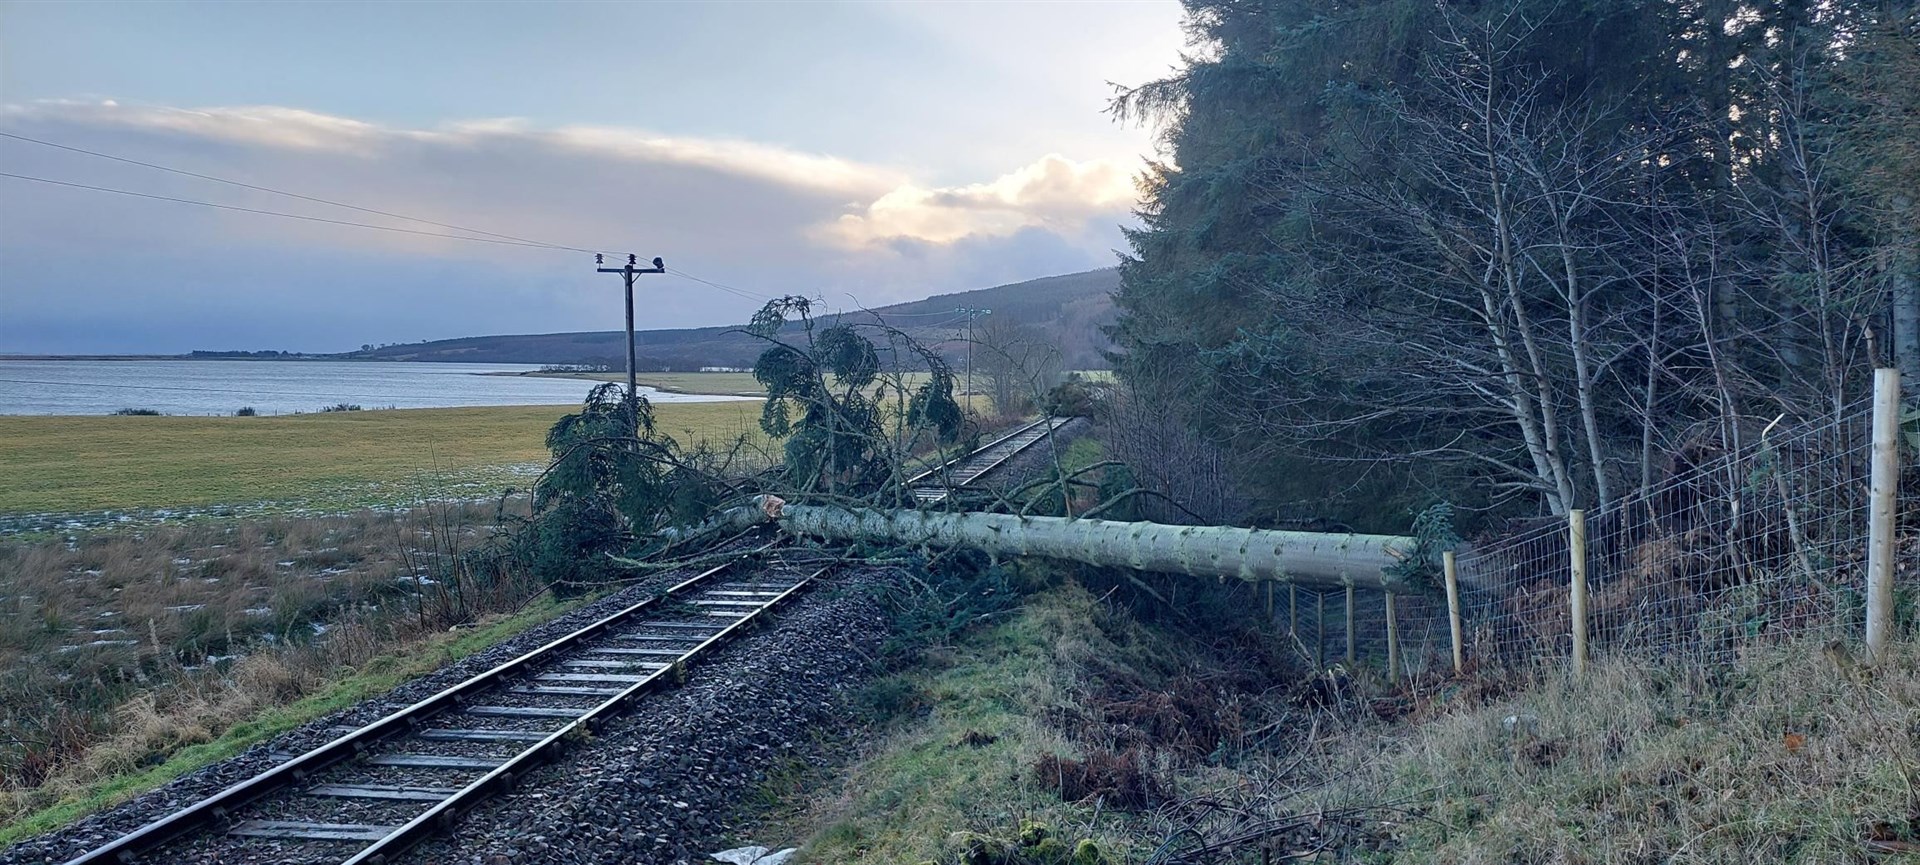 A tree was brought down by Storm Jocelyn on the rail line at Tain.